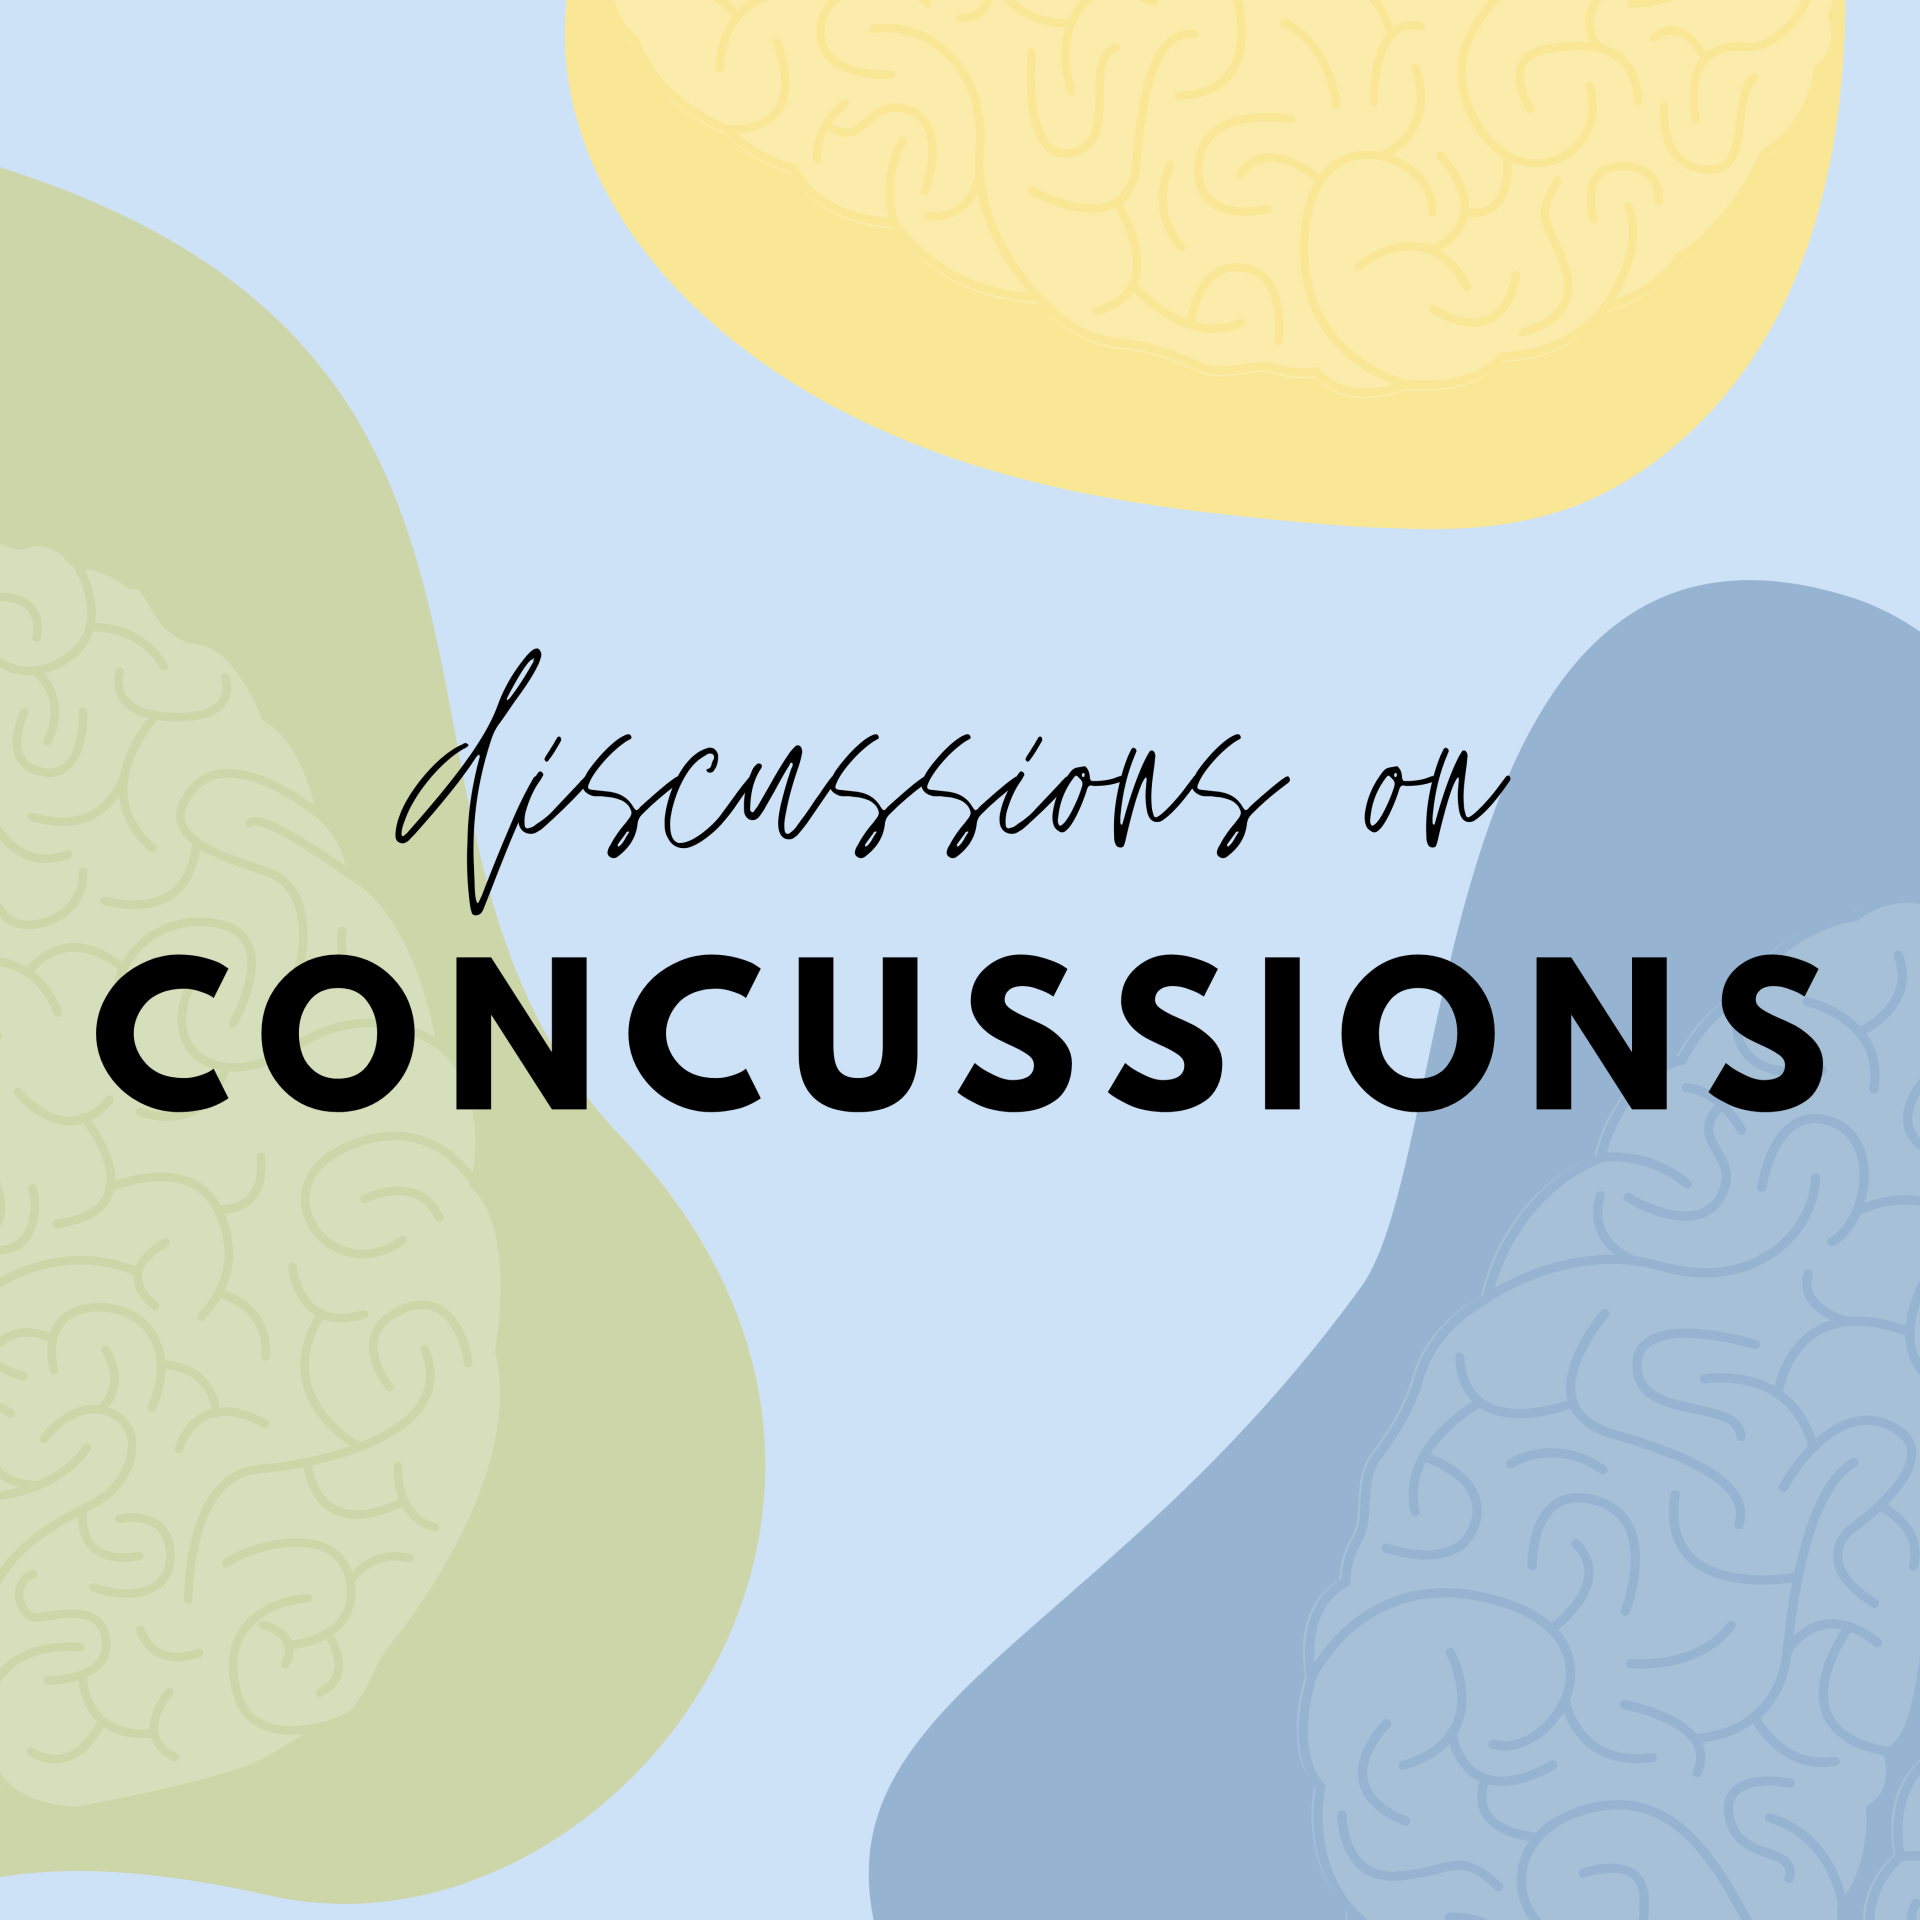 Discussions on Concussions